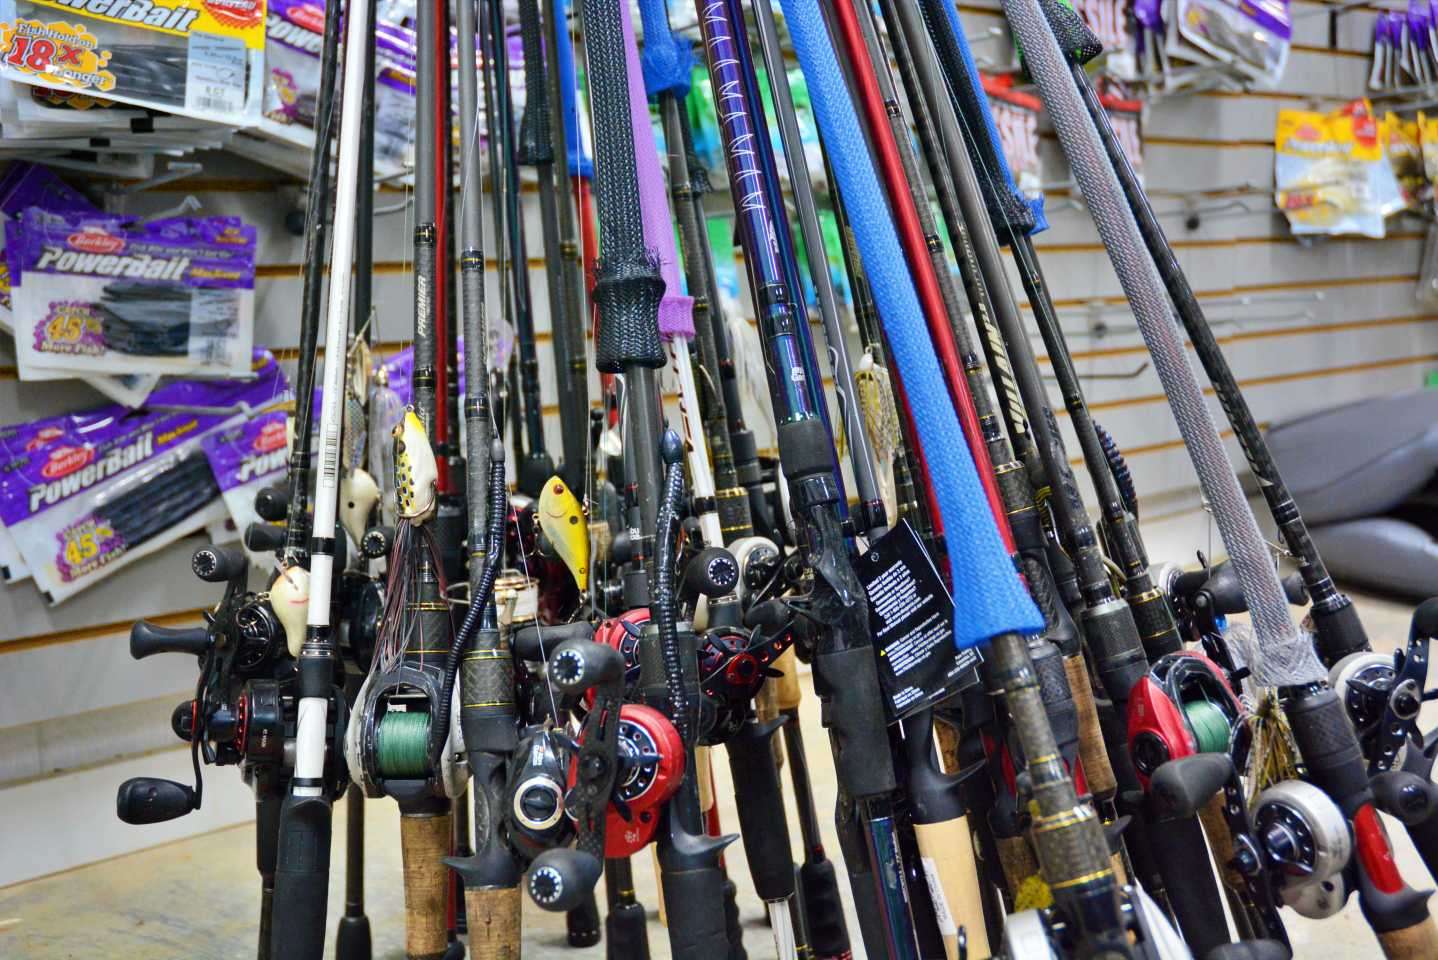 These combos were recently unpacked from the 2020 boat. âThey are rigged, as is, for the final Open of the year at Lay Lake,â he said. 